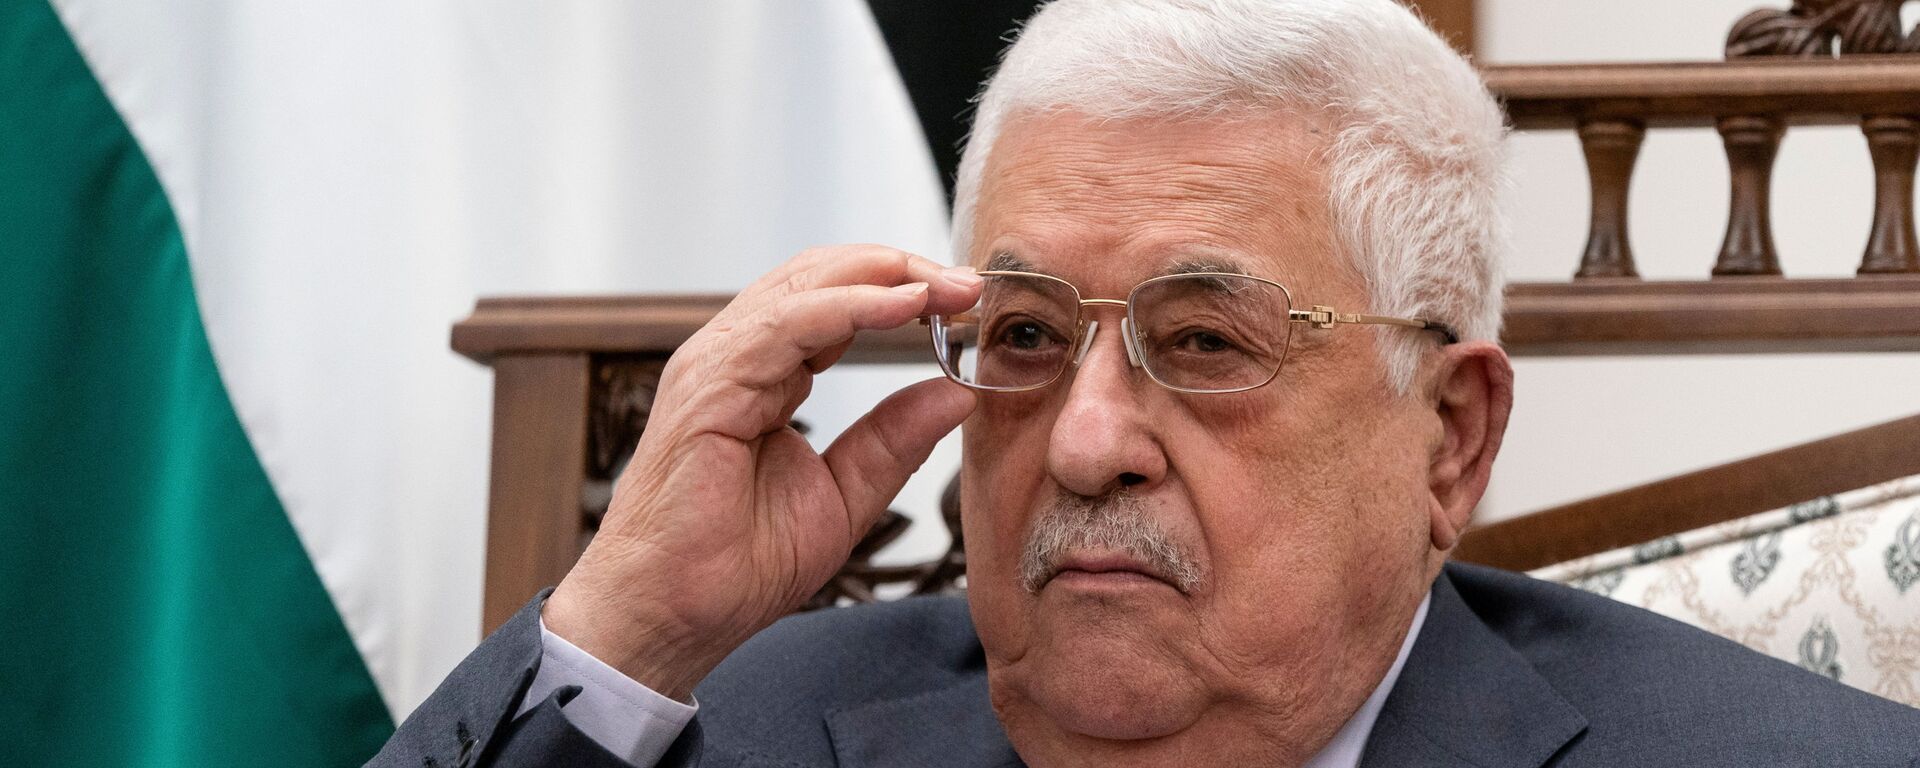 Palestinian President Mahmoud Abbas adjusts his glasses as he listens during a joint press conference with U.S. Secretary of State Antony Blinken (not pictured), in the West Bank city of Ramallah, May 25, 2021. - Sputnik International, 1920, 29.12.2021